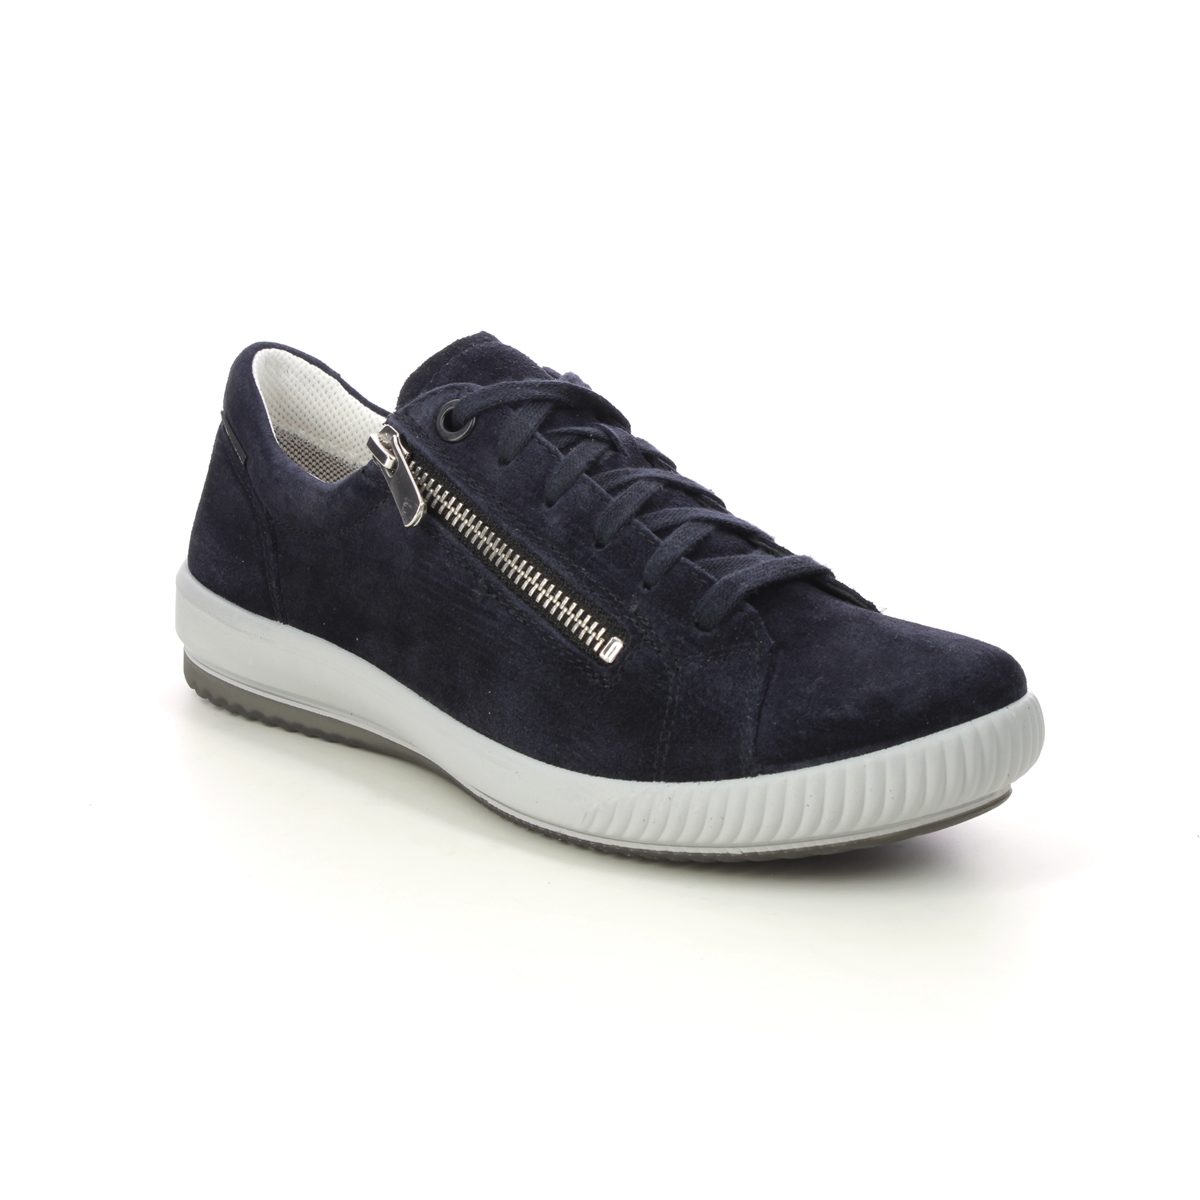 Legero Tanaro 5 Gtx Navy Suede Womens lacing shoes 2000219-8000 in a Plain Leather in Size 9